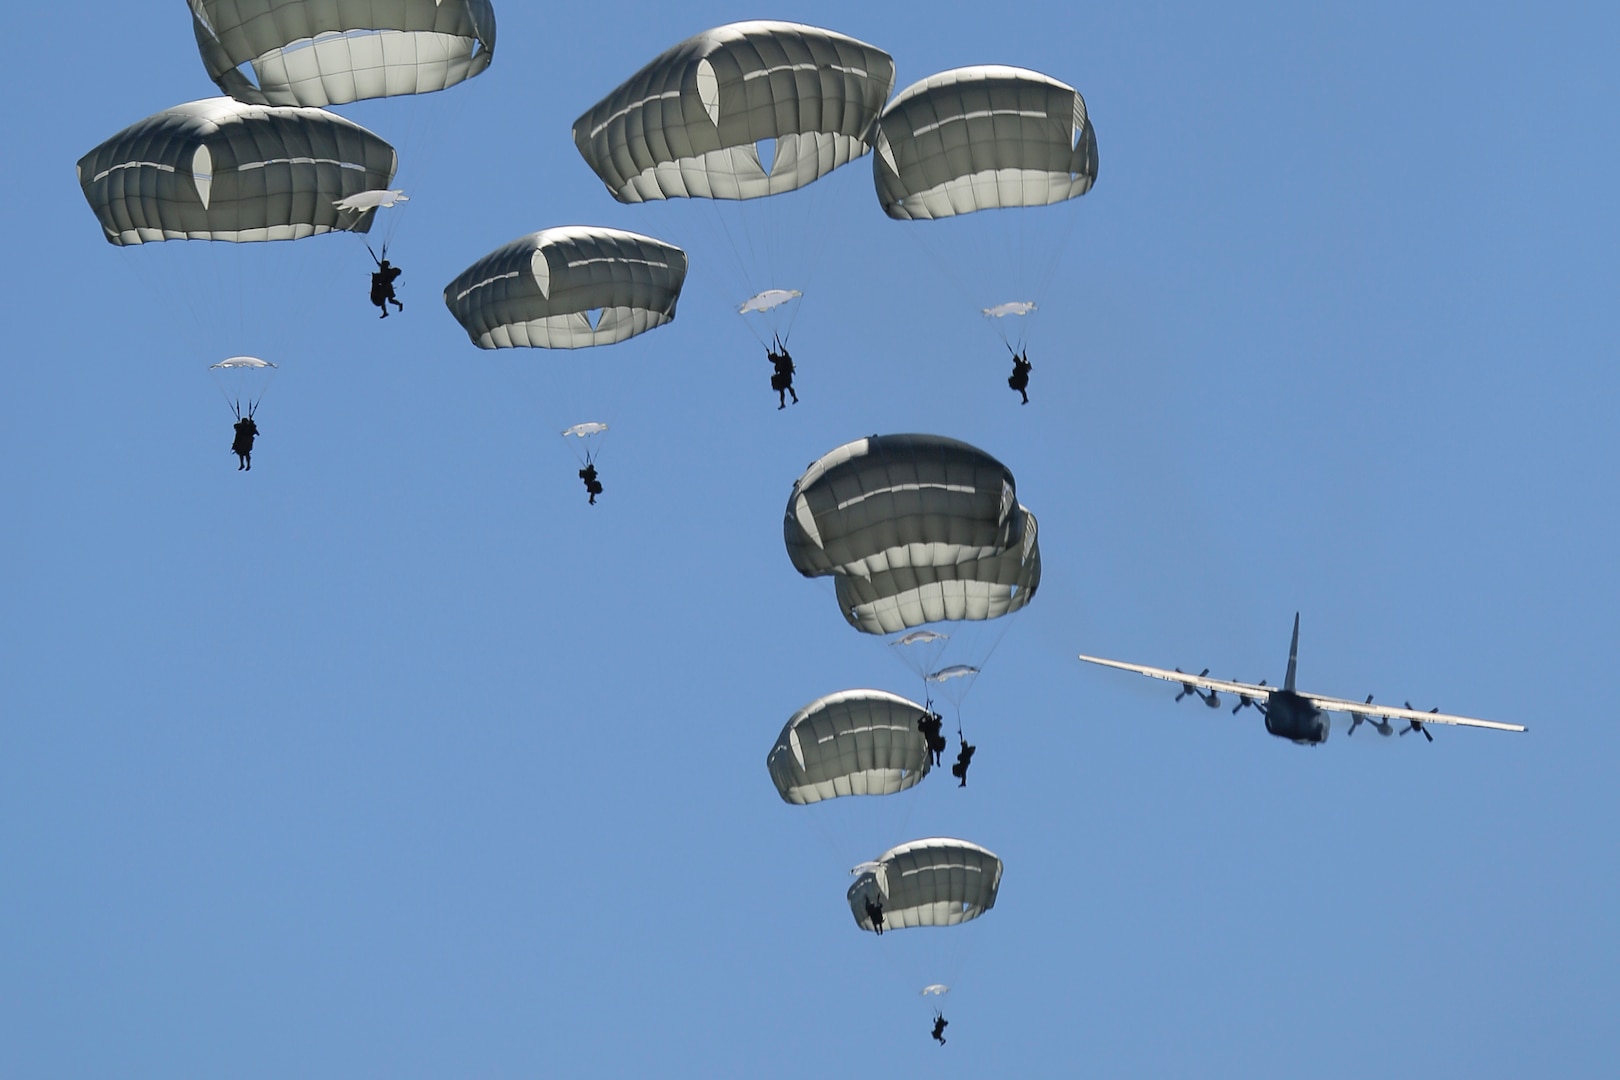 Paratroopers assigned to 1st Battalion (Airborne), 501st Infantry Regiment, 4th Infantry Brigade Combat Team (Airborne), 25th Infantry Division, U.S. Army Alaska descend after jumping out of a U.S. Air Force C-130 Hercules, assigned to the 374th Wing from Yokota Air Base, over Malemute drop zone, Joint Base Elmendorf-Richardson, Alaska, Aug. 24, 2015. Japanese Ground Self-Defense Force and U.S. Army paratroopers conducted the practice jump utilizing Royal Australian and U.S. Air Force aircraft as part of Pacific Airlift Rally 2015, a biennial, multilateral tactical military symposium designed to enhance military airlift interoperability and cooperation between nations of the Pacific region for future humanitarian missions. (U.S. Air Force photo by Alejandro Pena/Released)
